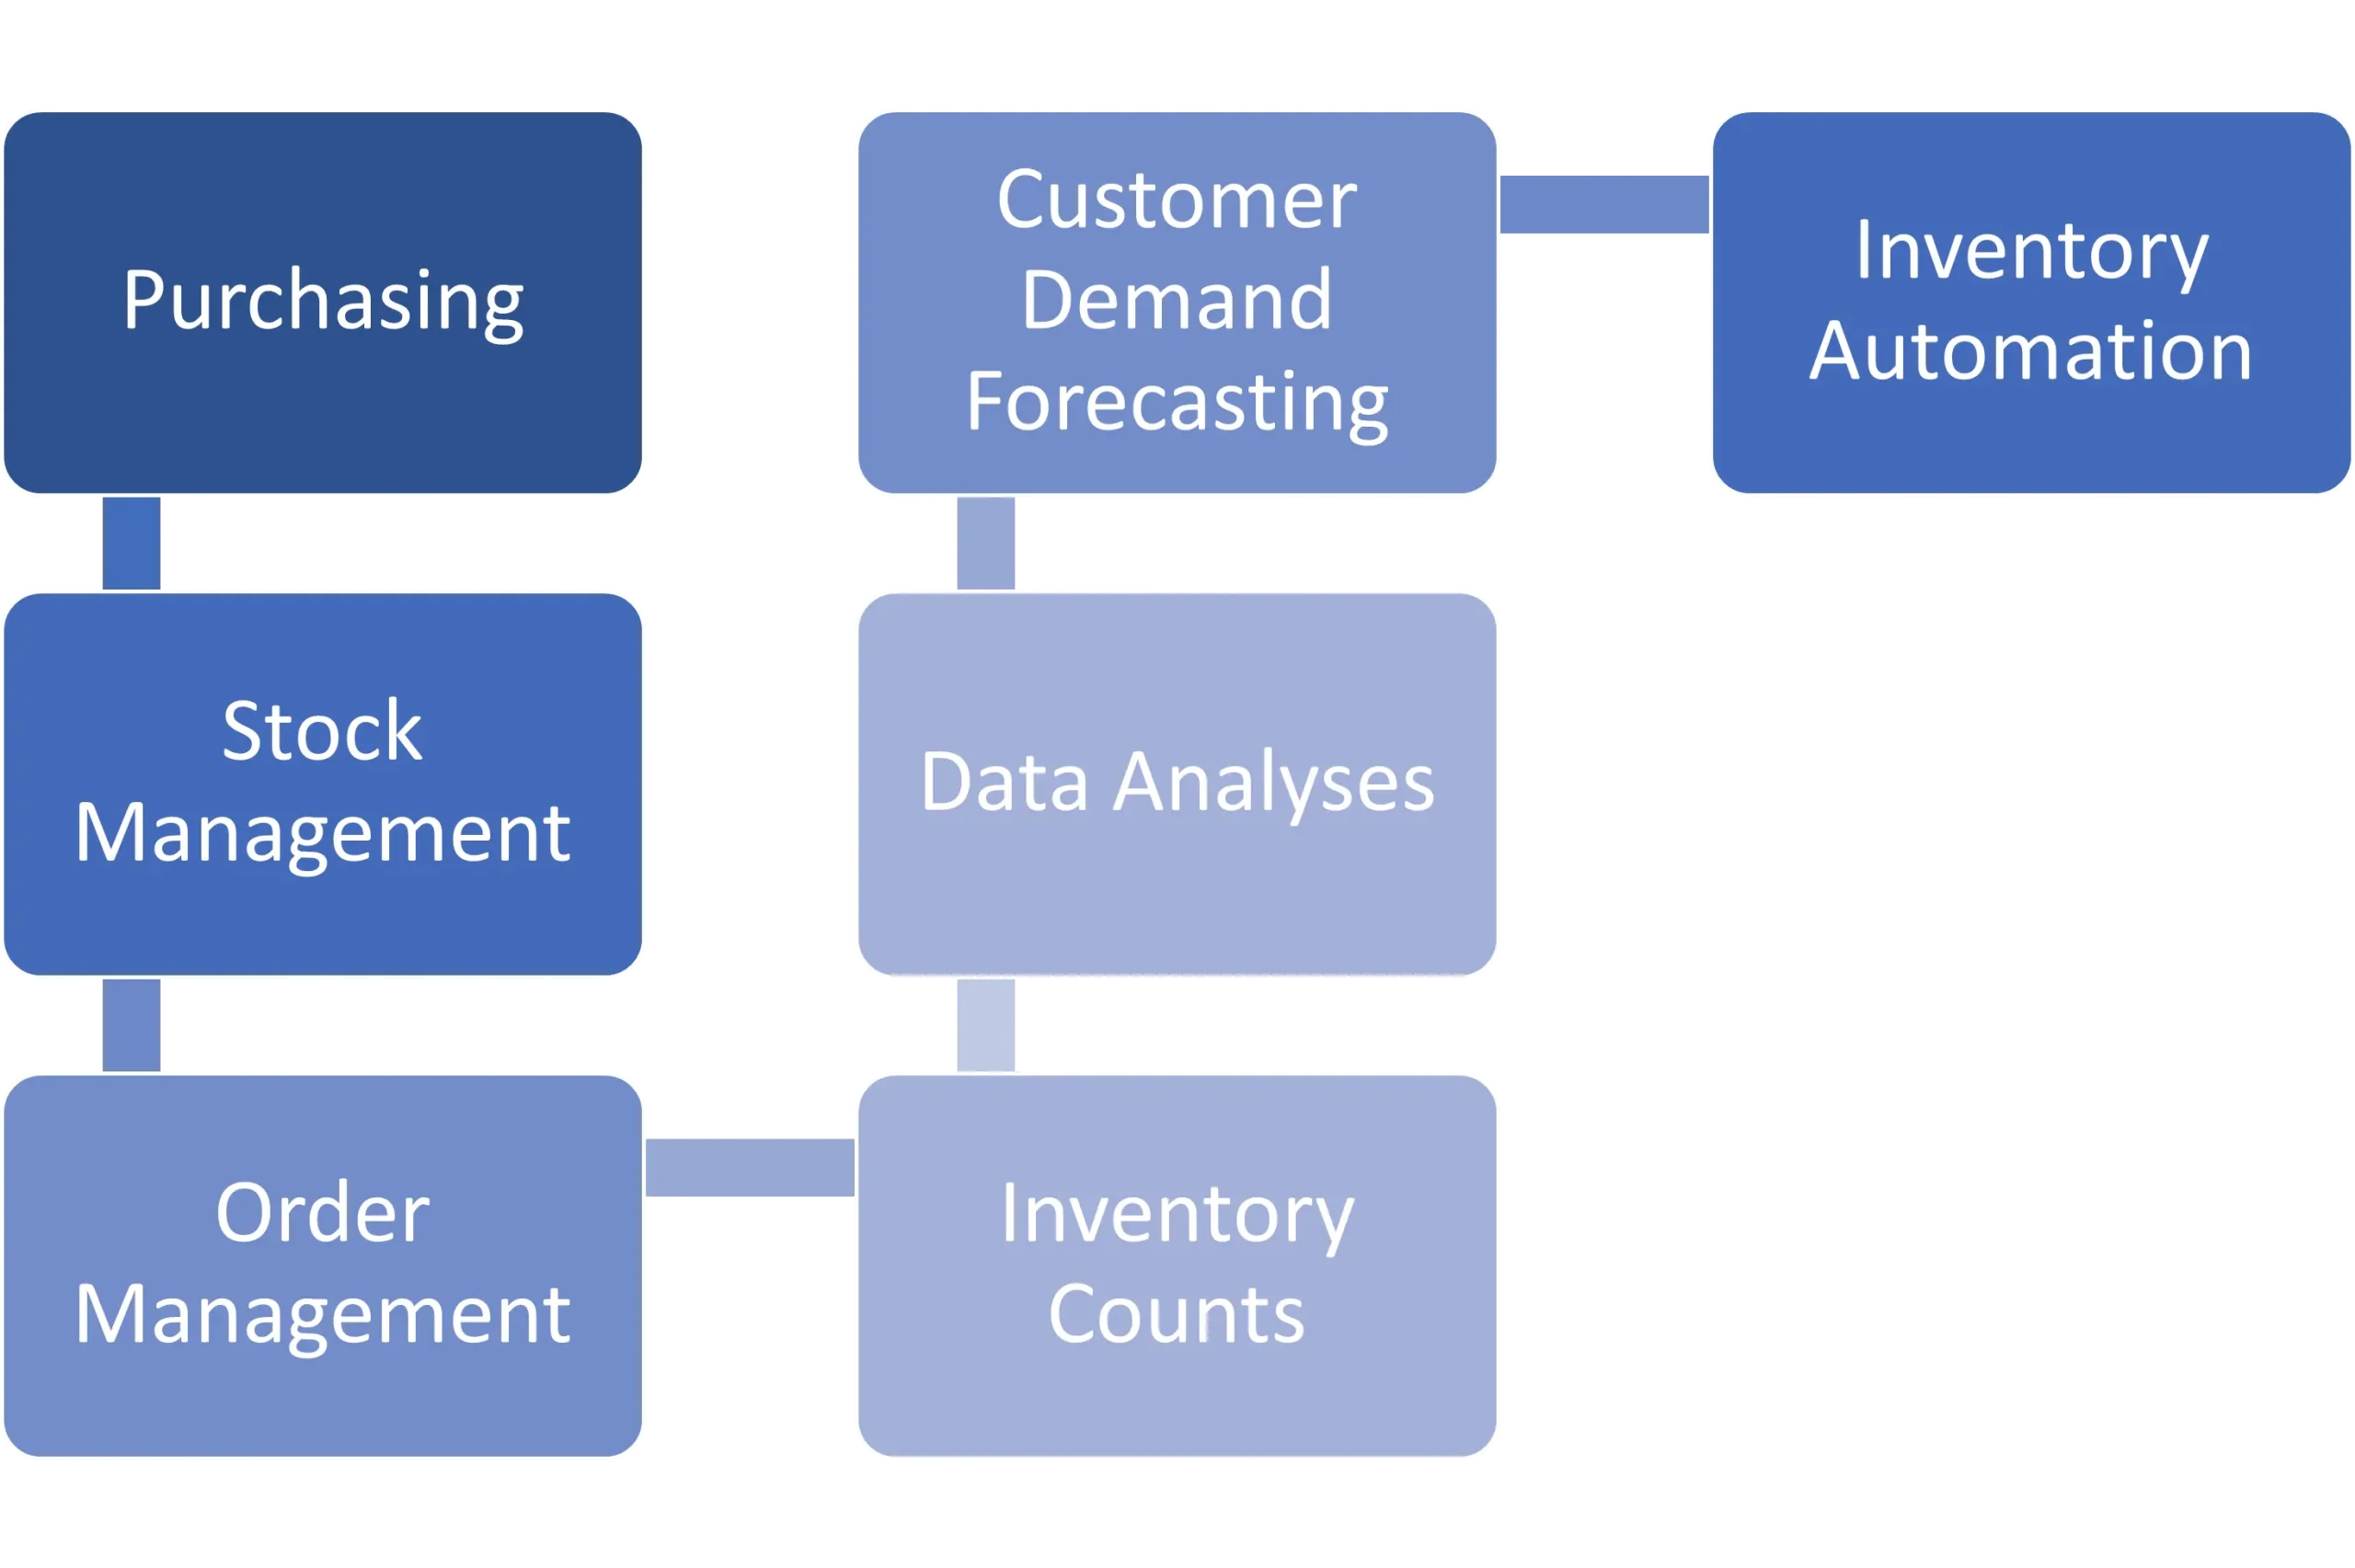 Inventory Automation